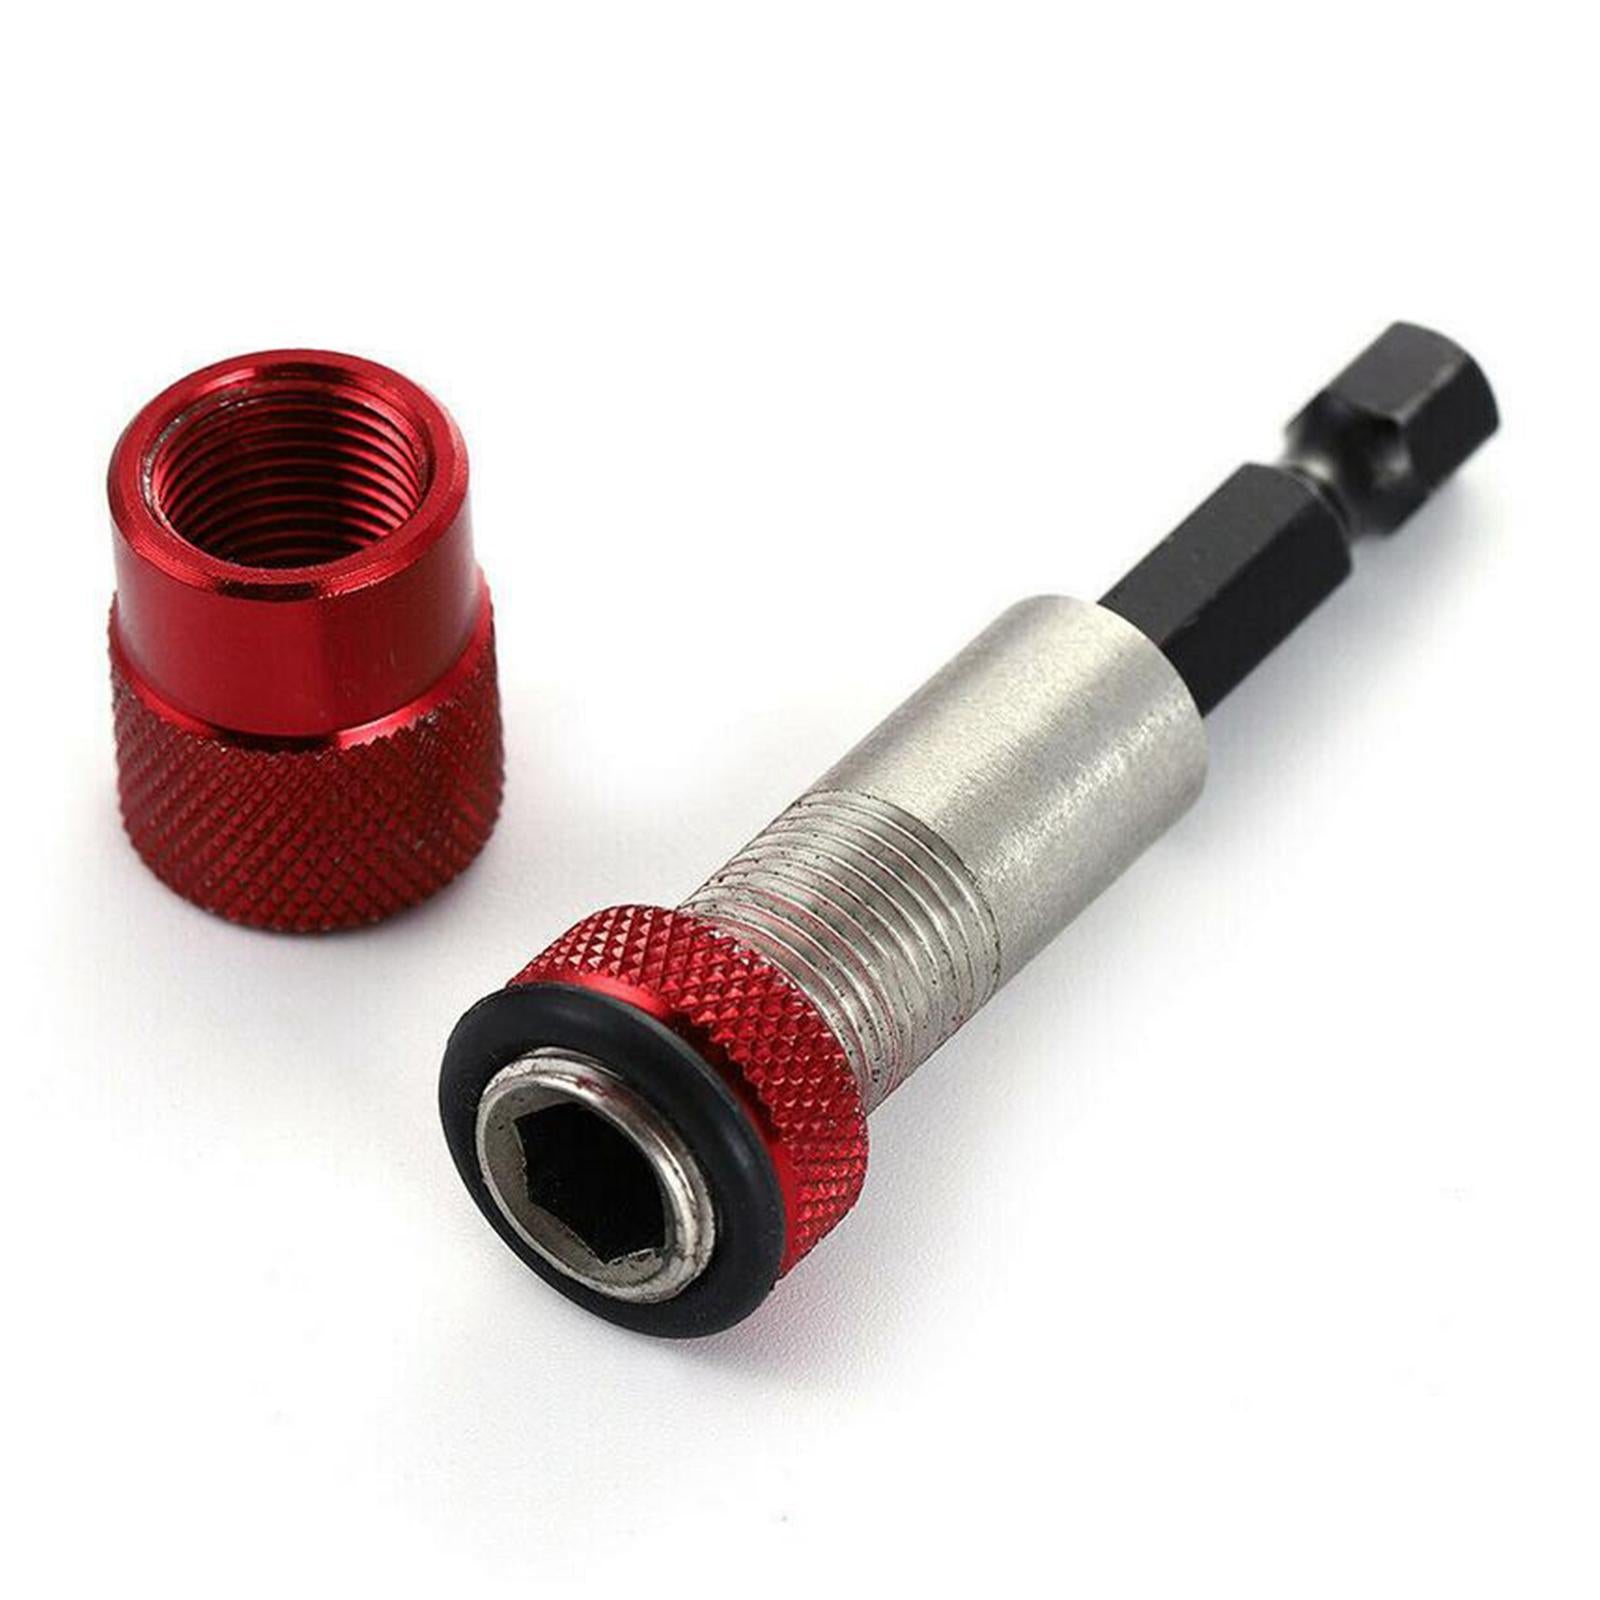 Magnetic Drywall Screw Bit Holder 1/4 Hex Shank Drill Screw Tool Red